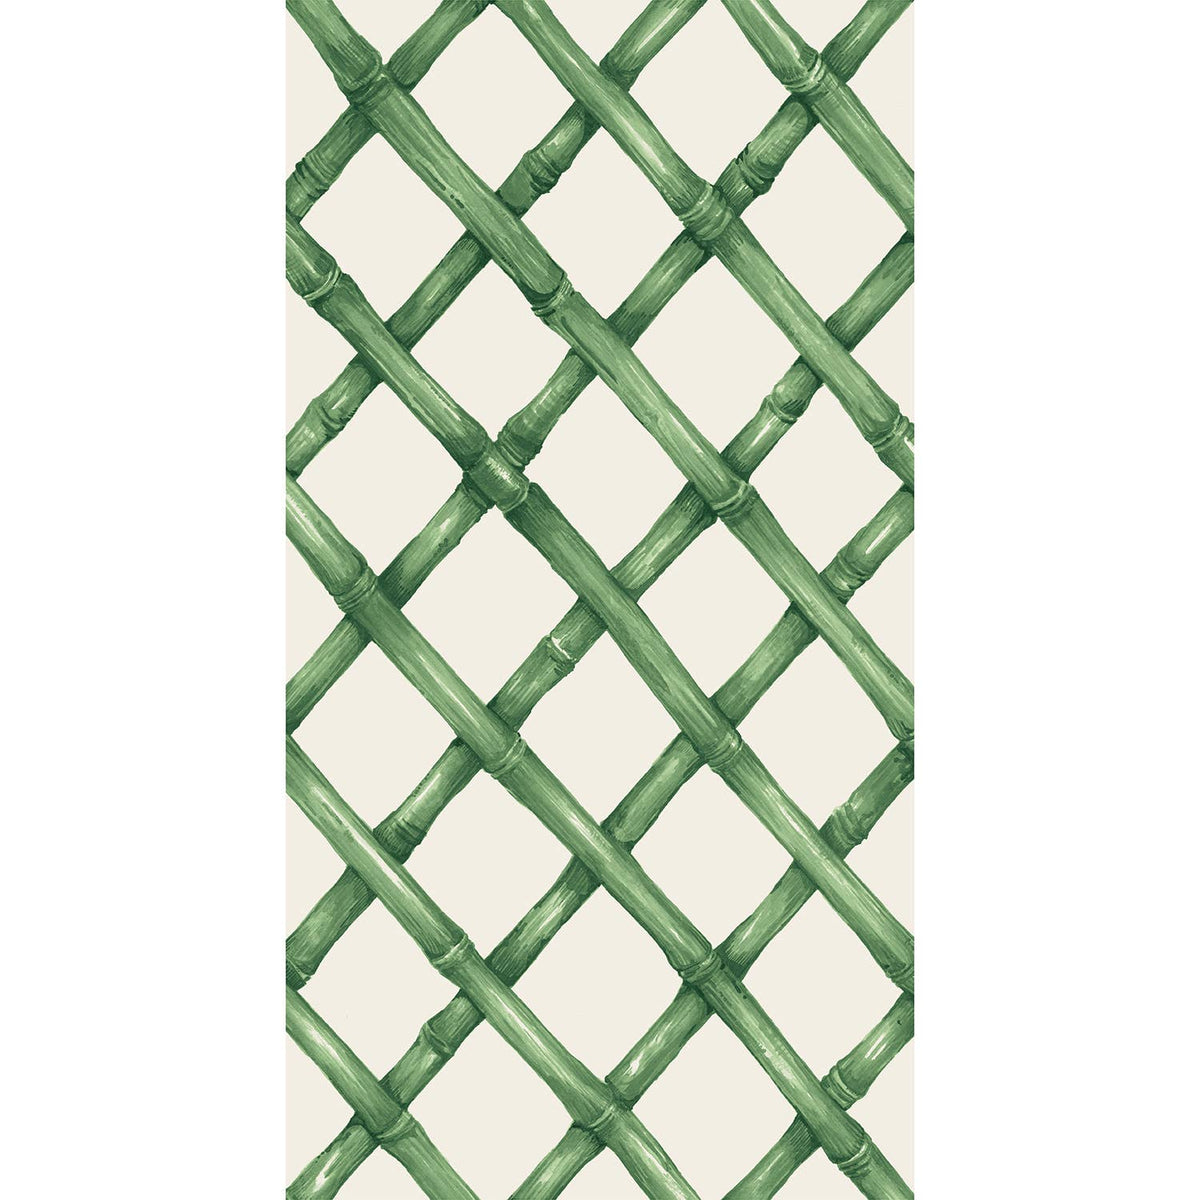 Green Lattice Guest Napkin - Pack of 16 - The Preppy Bunny